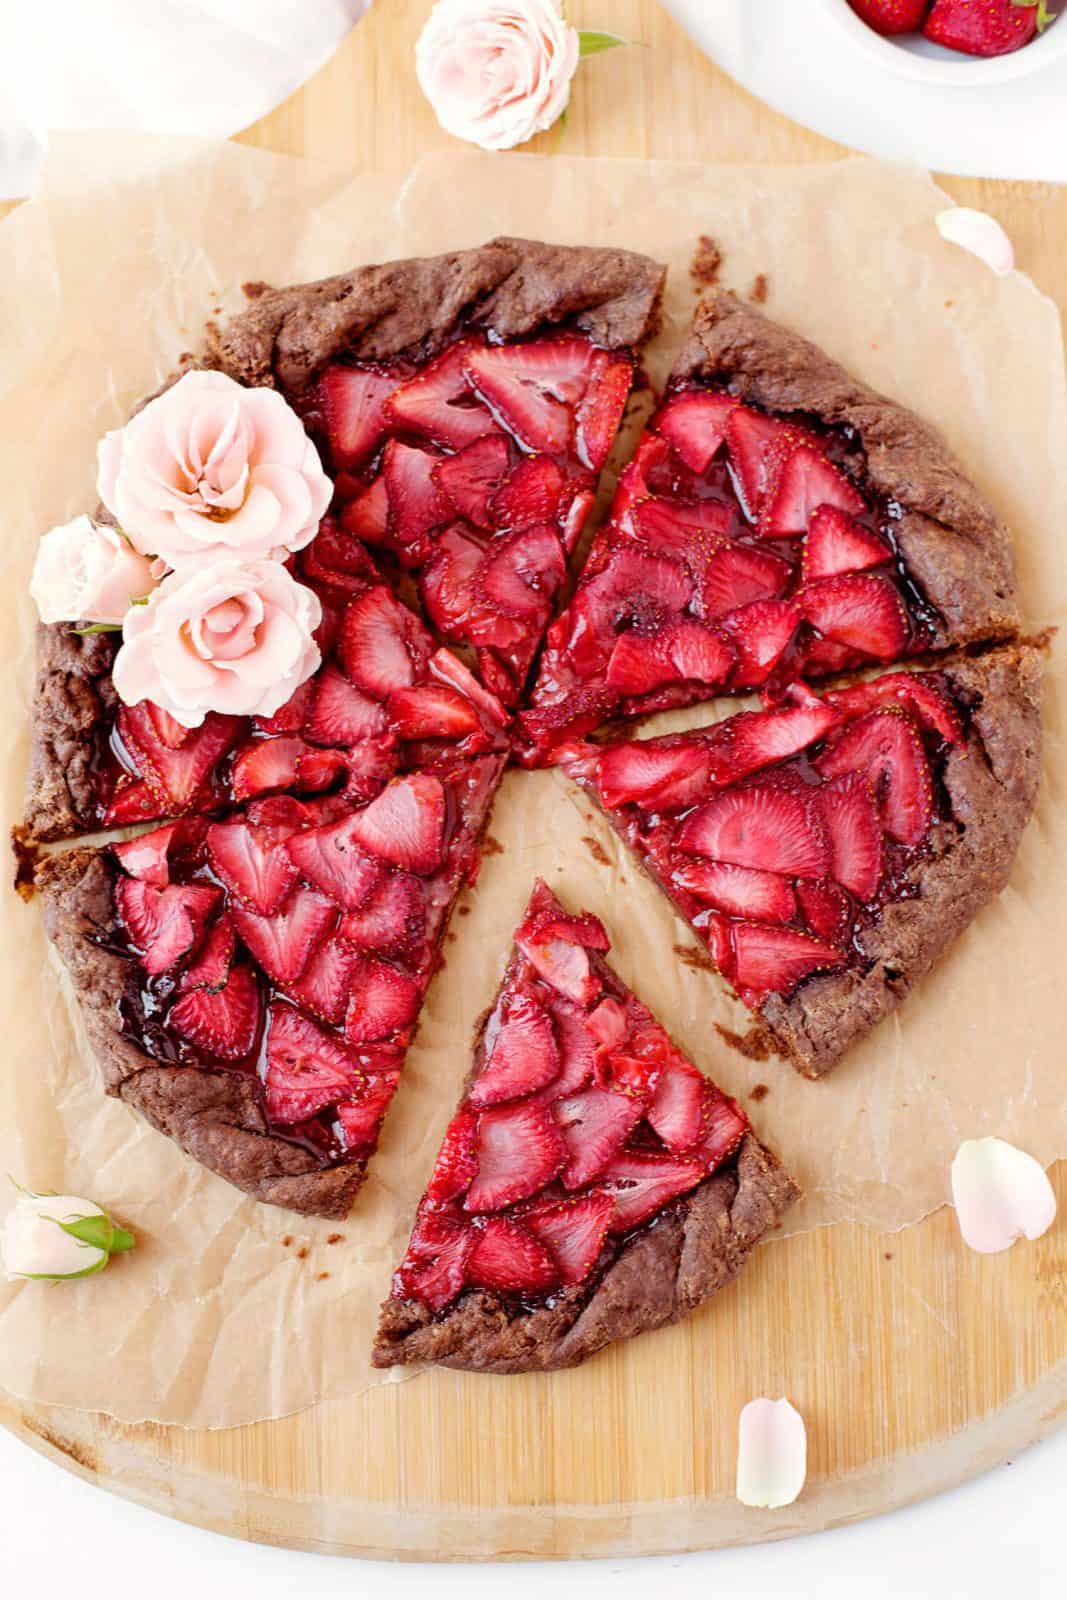 STRAWBERRIES AND CHAMPAGNE GALETTE WITH A CHOCOLATE CRUST